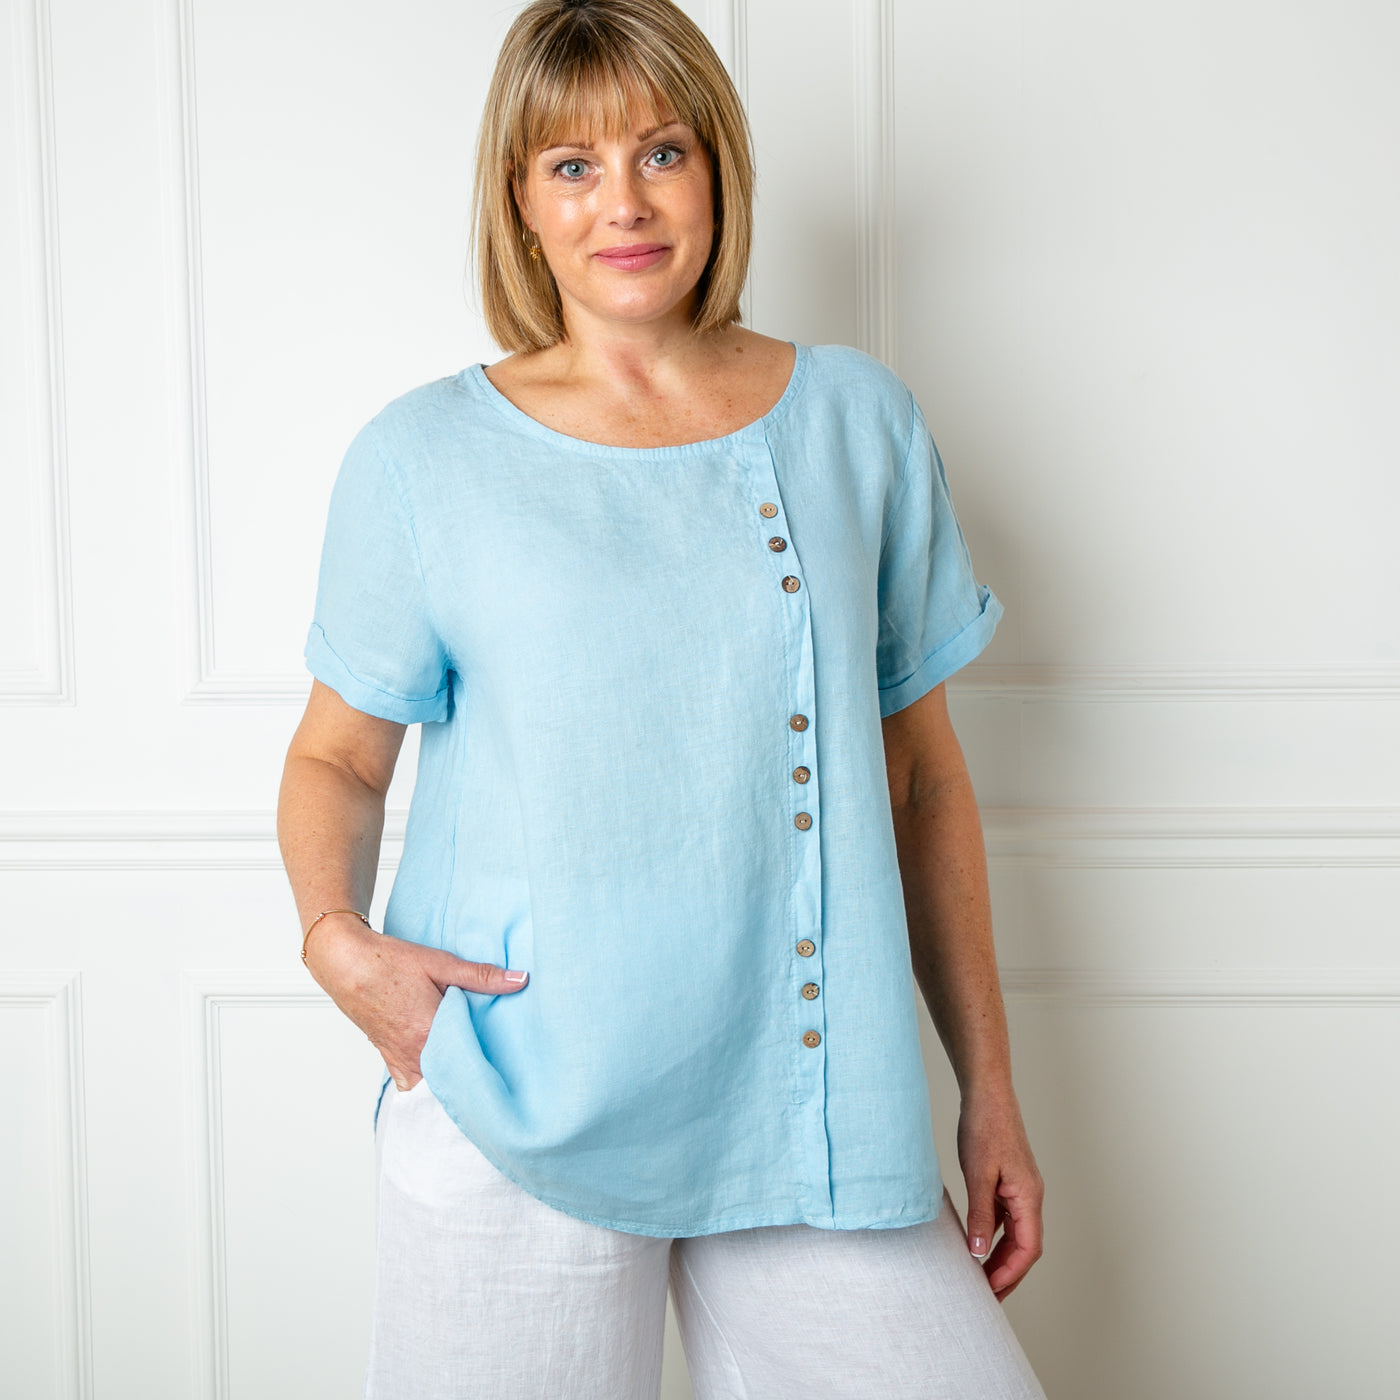 The baby blue Button Down Linen Top with short sleeves and a round neckline